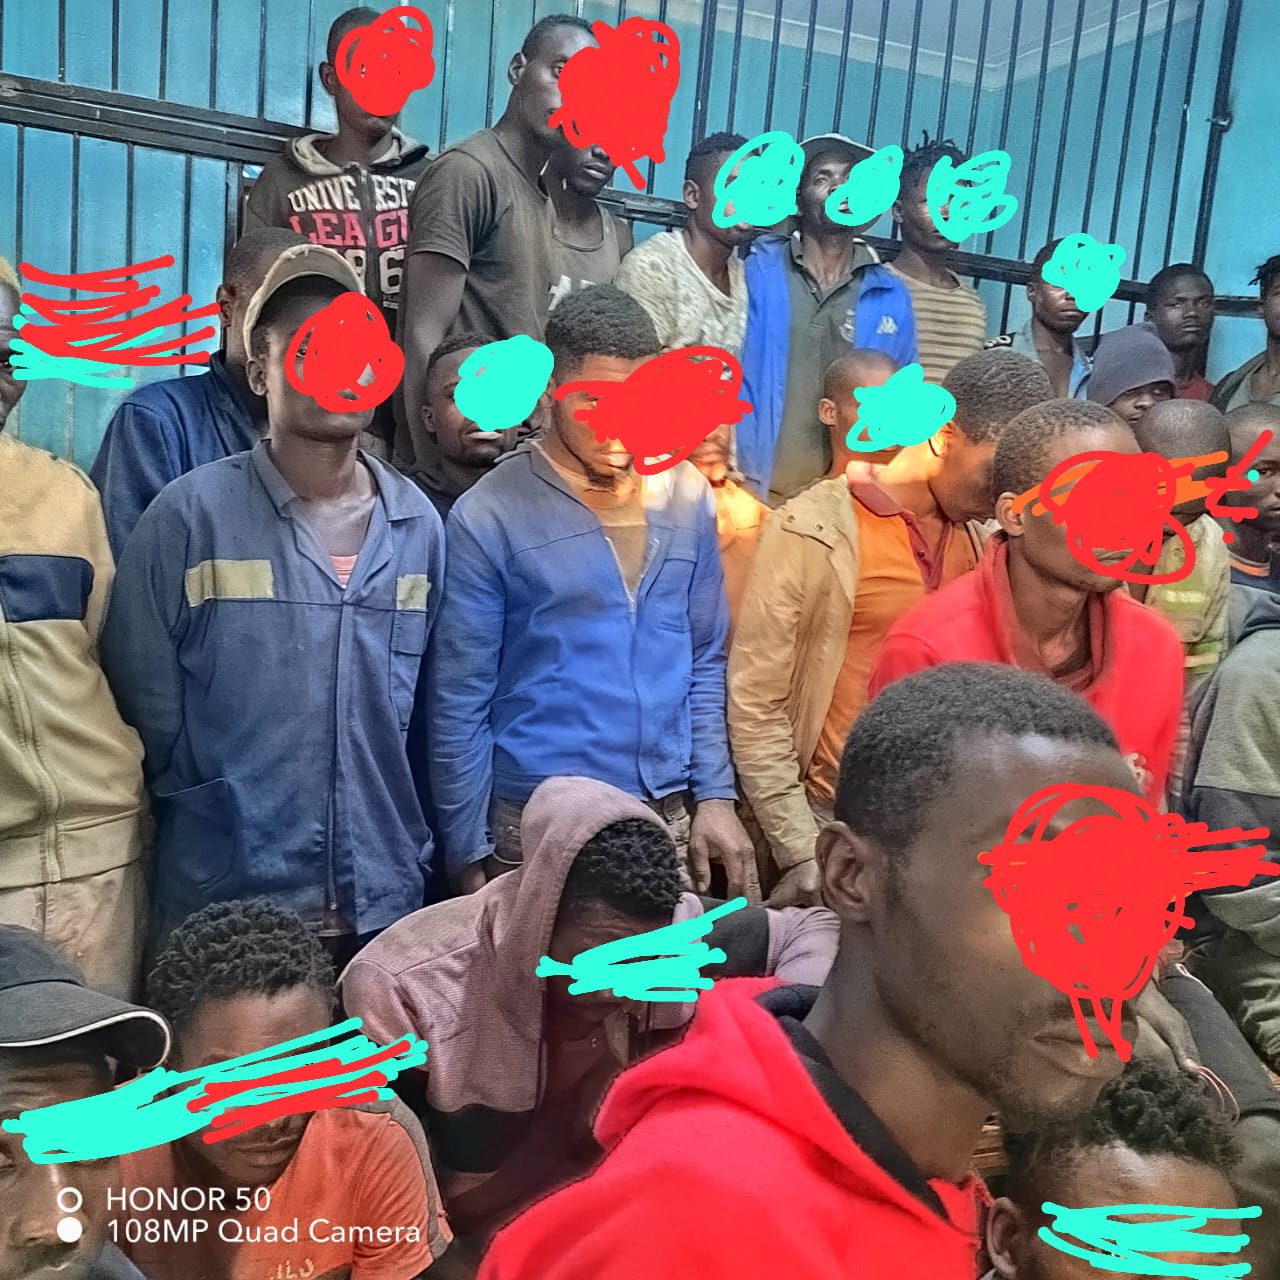 42 FOREIGN NATIONALS INCLUDING ONE SOUTH AFRICAN TO APPEAR IN COURT FOR ILLEGAL MINING OF A PRECIOUS METAL AND CONTRAVENTION OF IMMIGRATION ACT